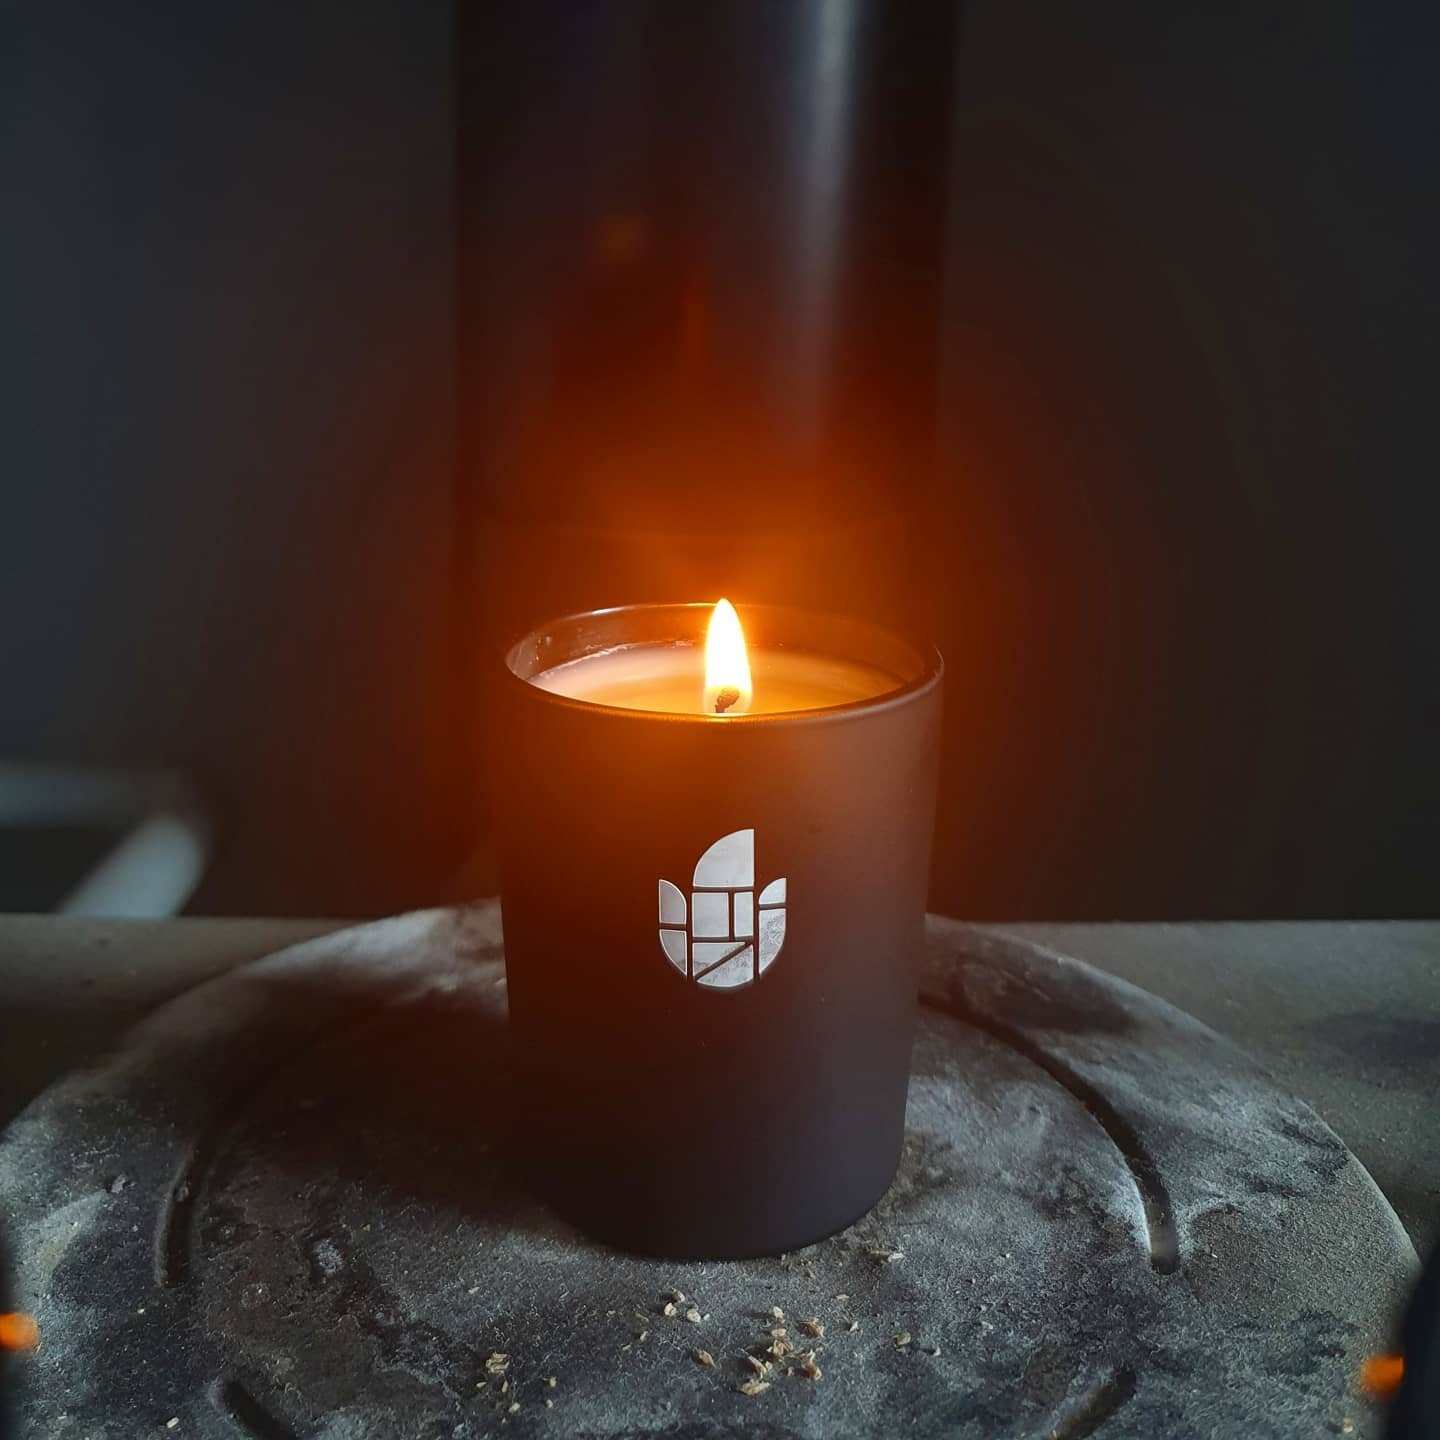 It's been a busy weekend in the garden, so no new wellbeing ritual this evening. But feat not, there are still a bundle on www.candelabros.co.uk to try out.

Have a great week gang!

#menscandles #candlesformen #mancave #scentedcandles #soycandle #ho